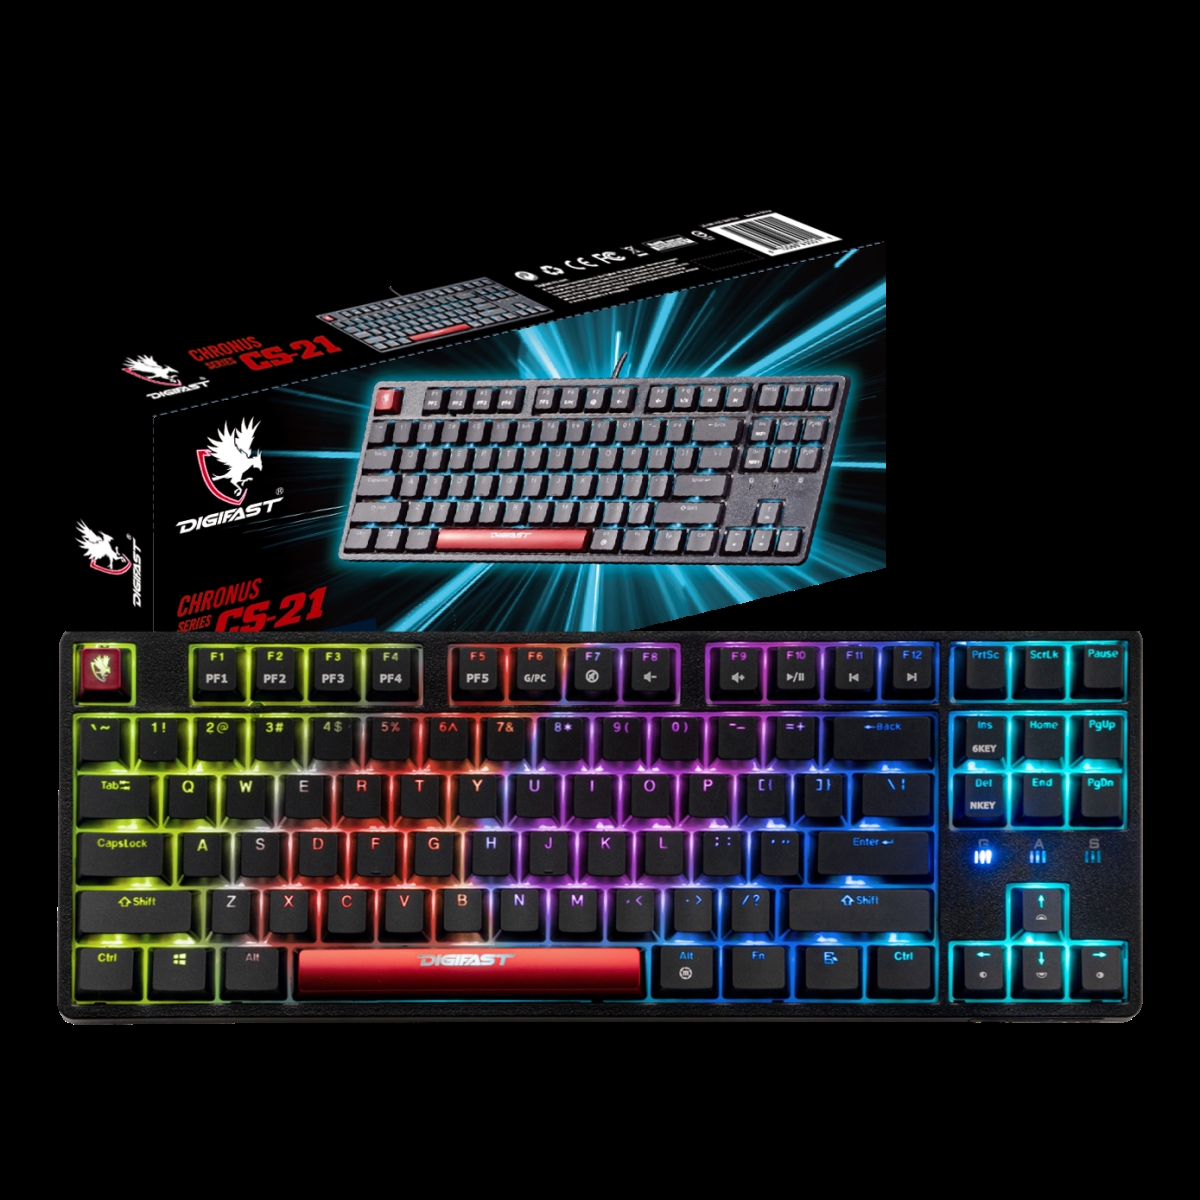 Picture of Digifast CS-21-R DIGIFAST Mechanical RGB Tenkeyless Gaming Chronus Series Keyboard with Cherry MX Switches - Red Axis